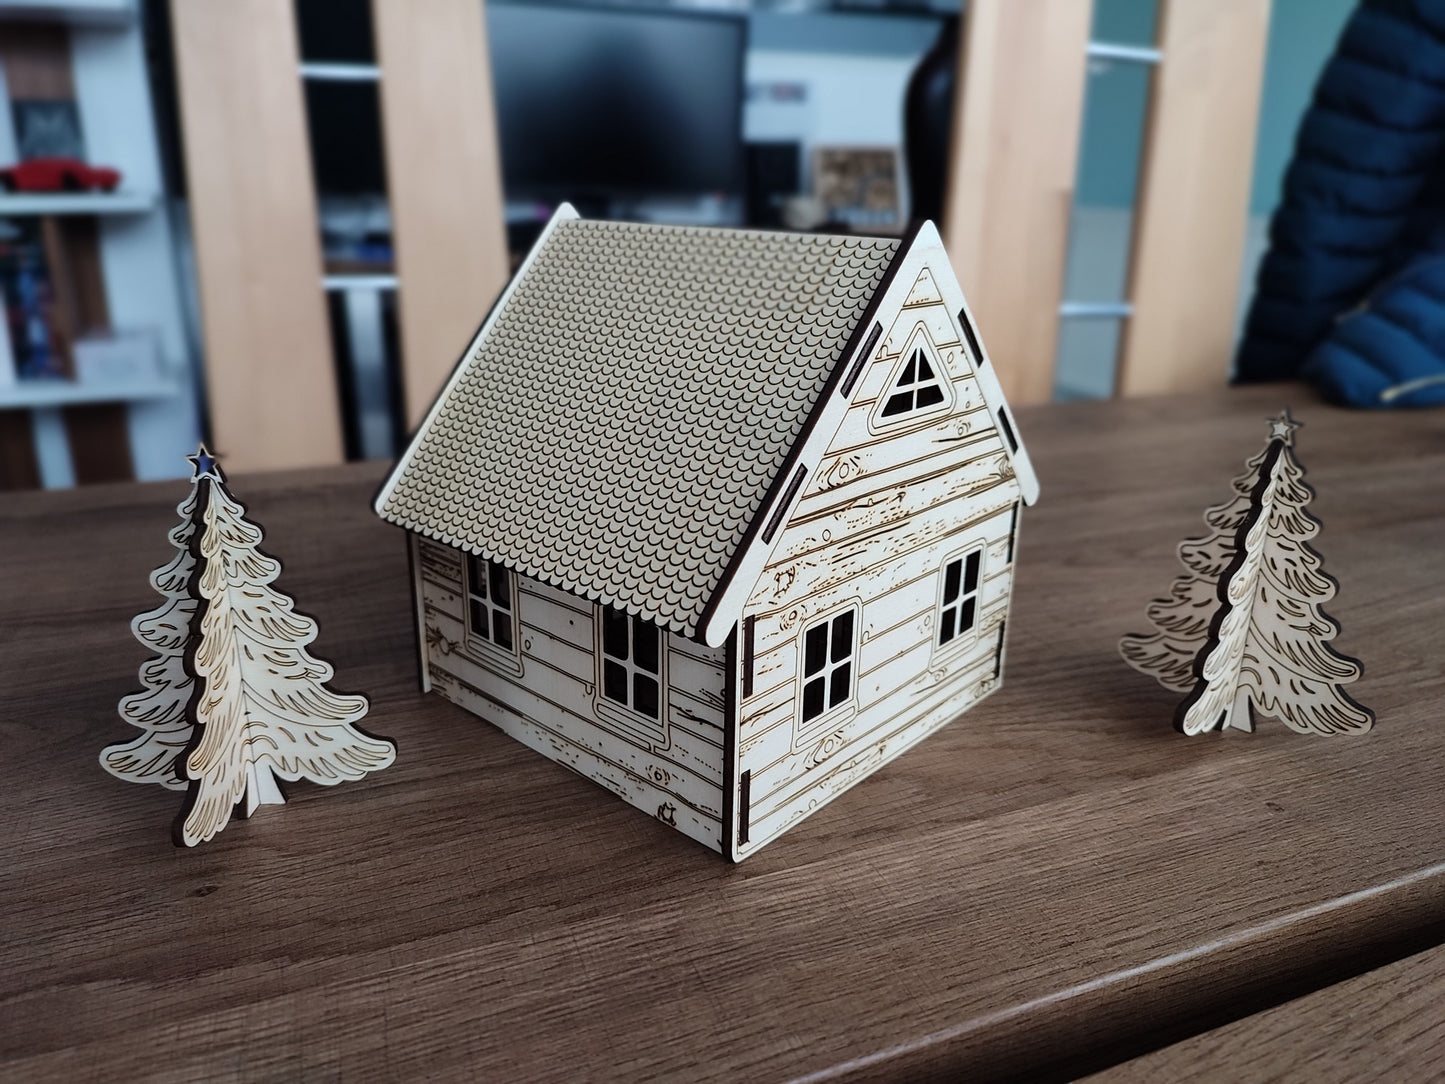 DIY wooden house decoration - Christmas decoration - DOWNLOAD ONLY